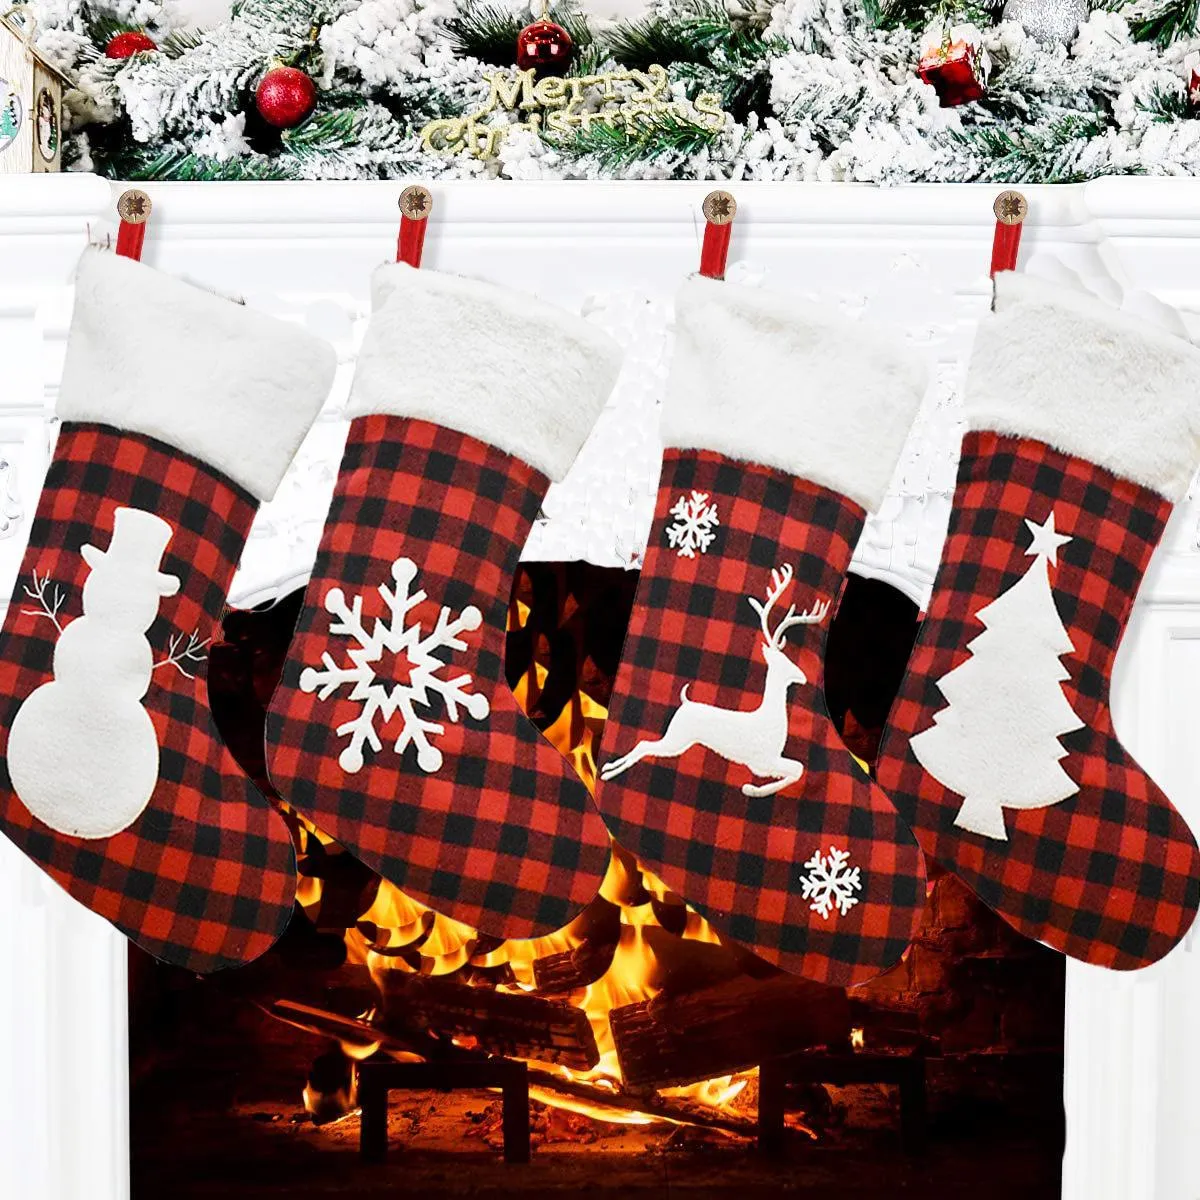 Large Size Red Grid Christmas Stocking Gift Bags For Kids Christmas Tree Ornament Xmas Pendant Socks Home Party Decoration